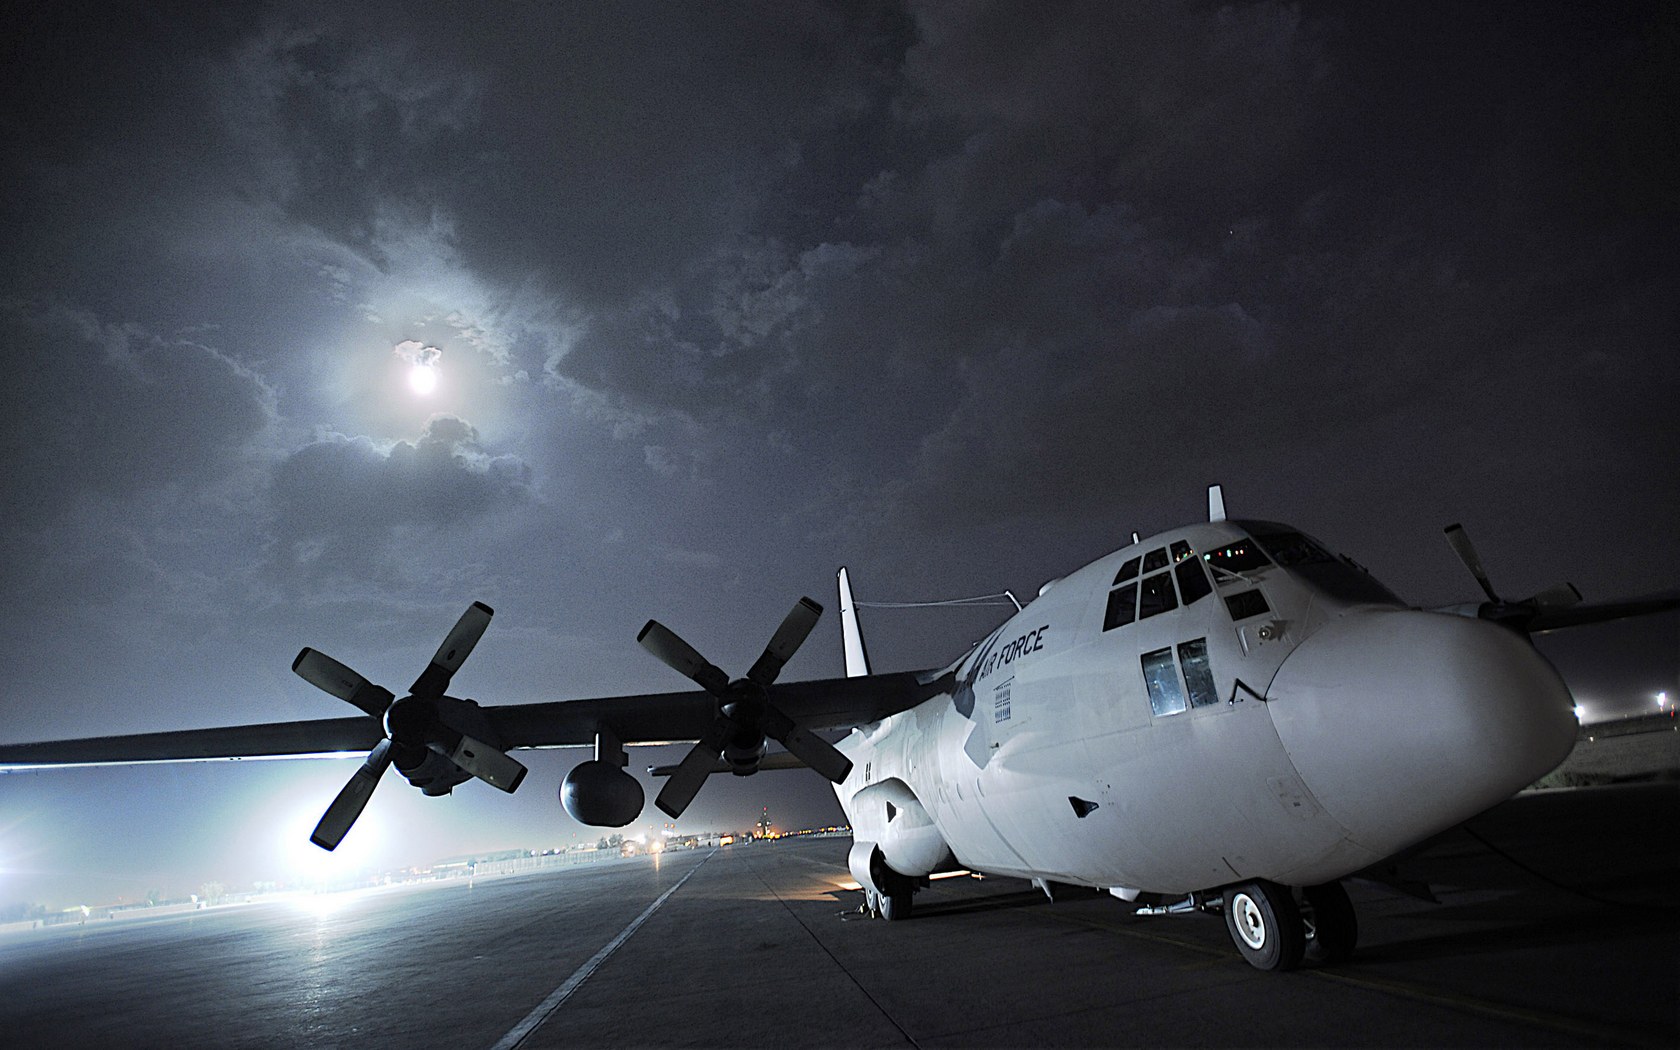 Download full size C-130 Hercules at night Military Airplanes wallpaper / 1680x1050